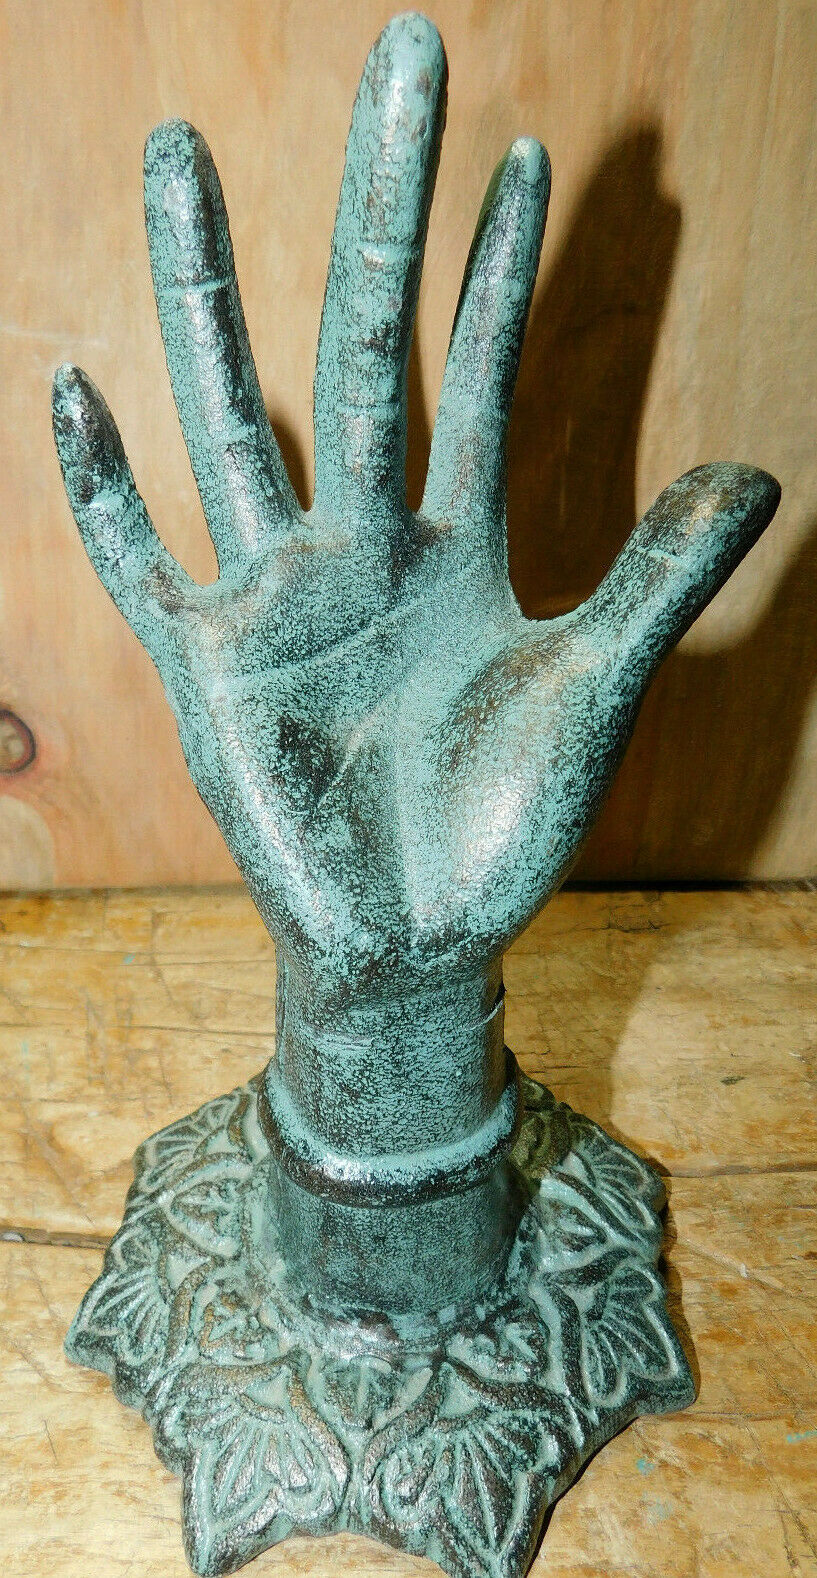 Cast Iron Hand Ring Holder Jewelry Display Home Decor Paper Weight Bookend Green